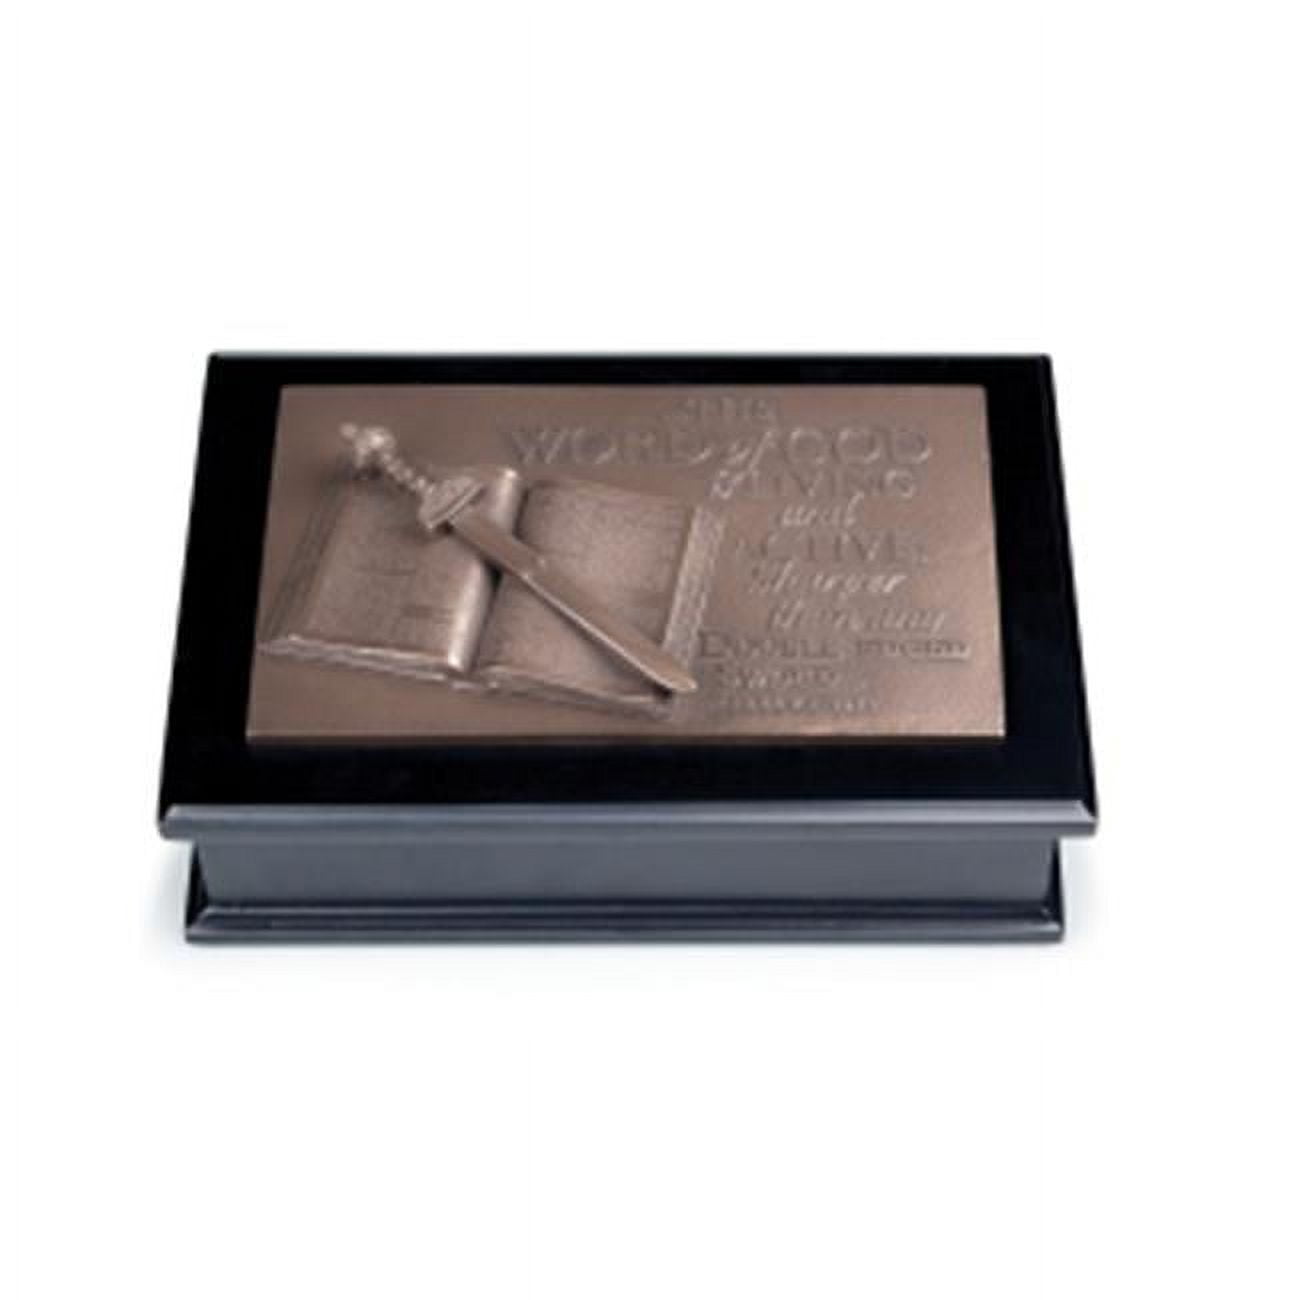 0089373 Sculpture-moments Of Faith - Word Of God Box - No. 23002